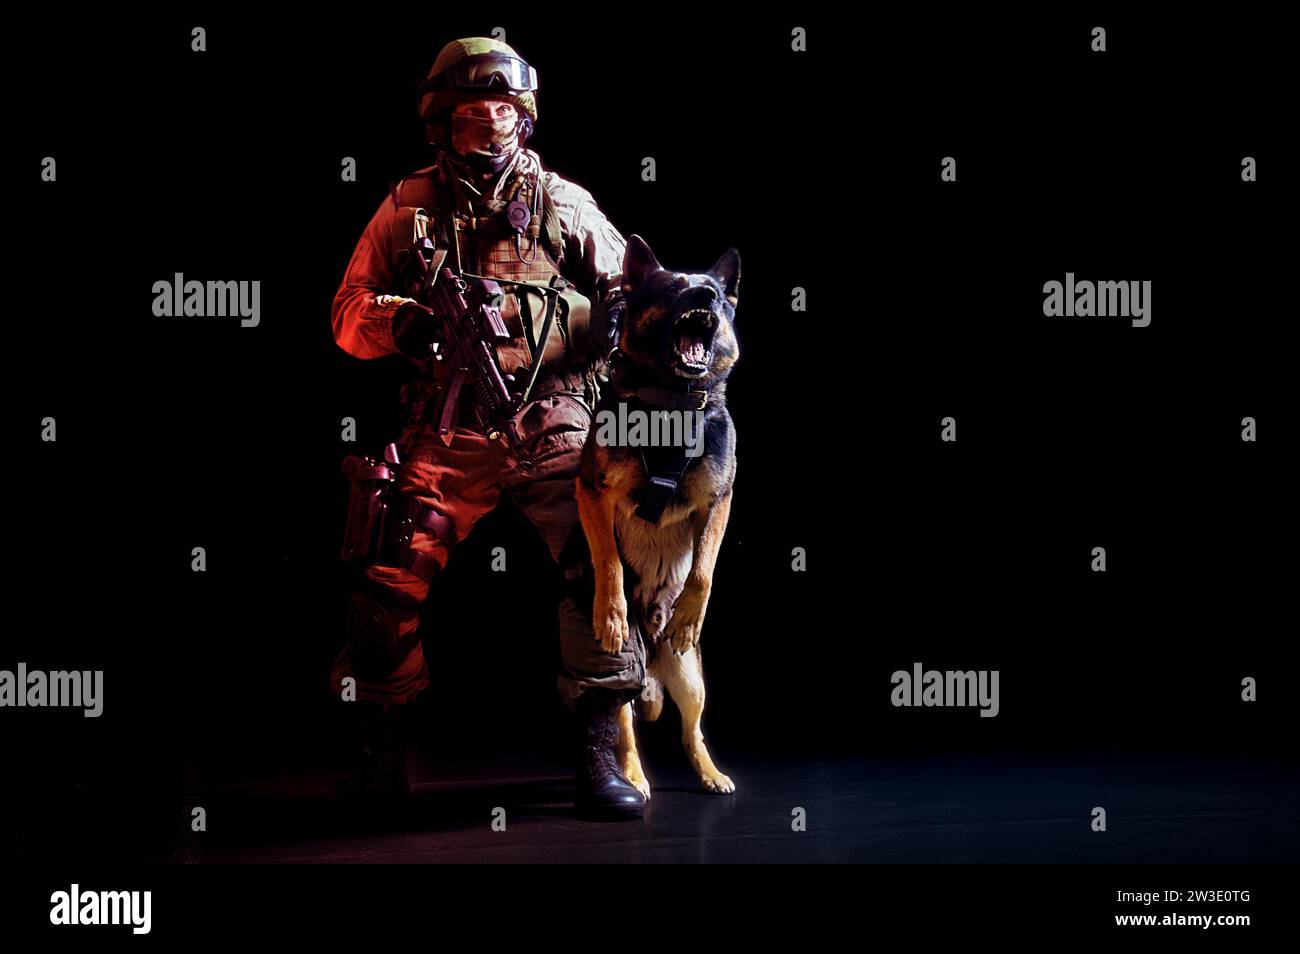 Armed man in military uniform with a machine gun restrains a barking service dog. Mixed media Stock Photo